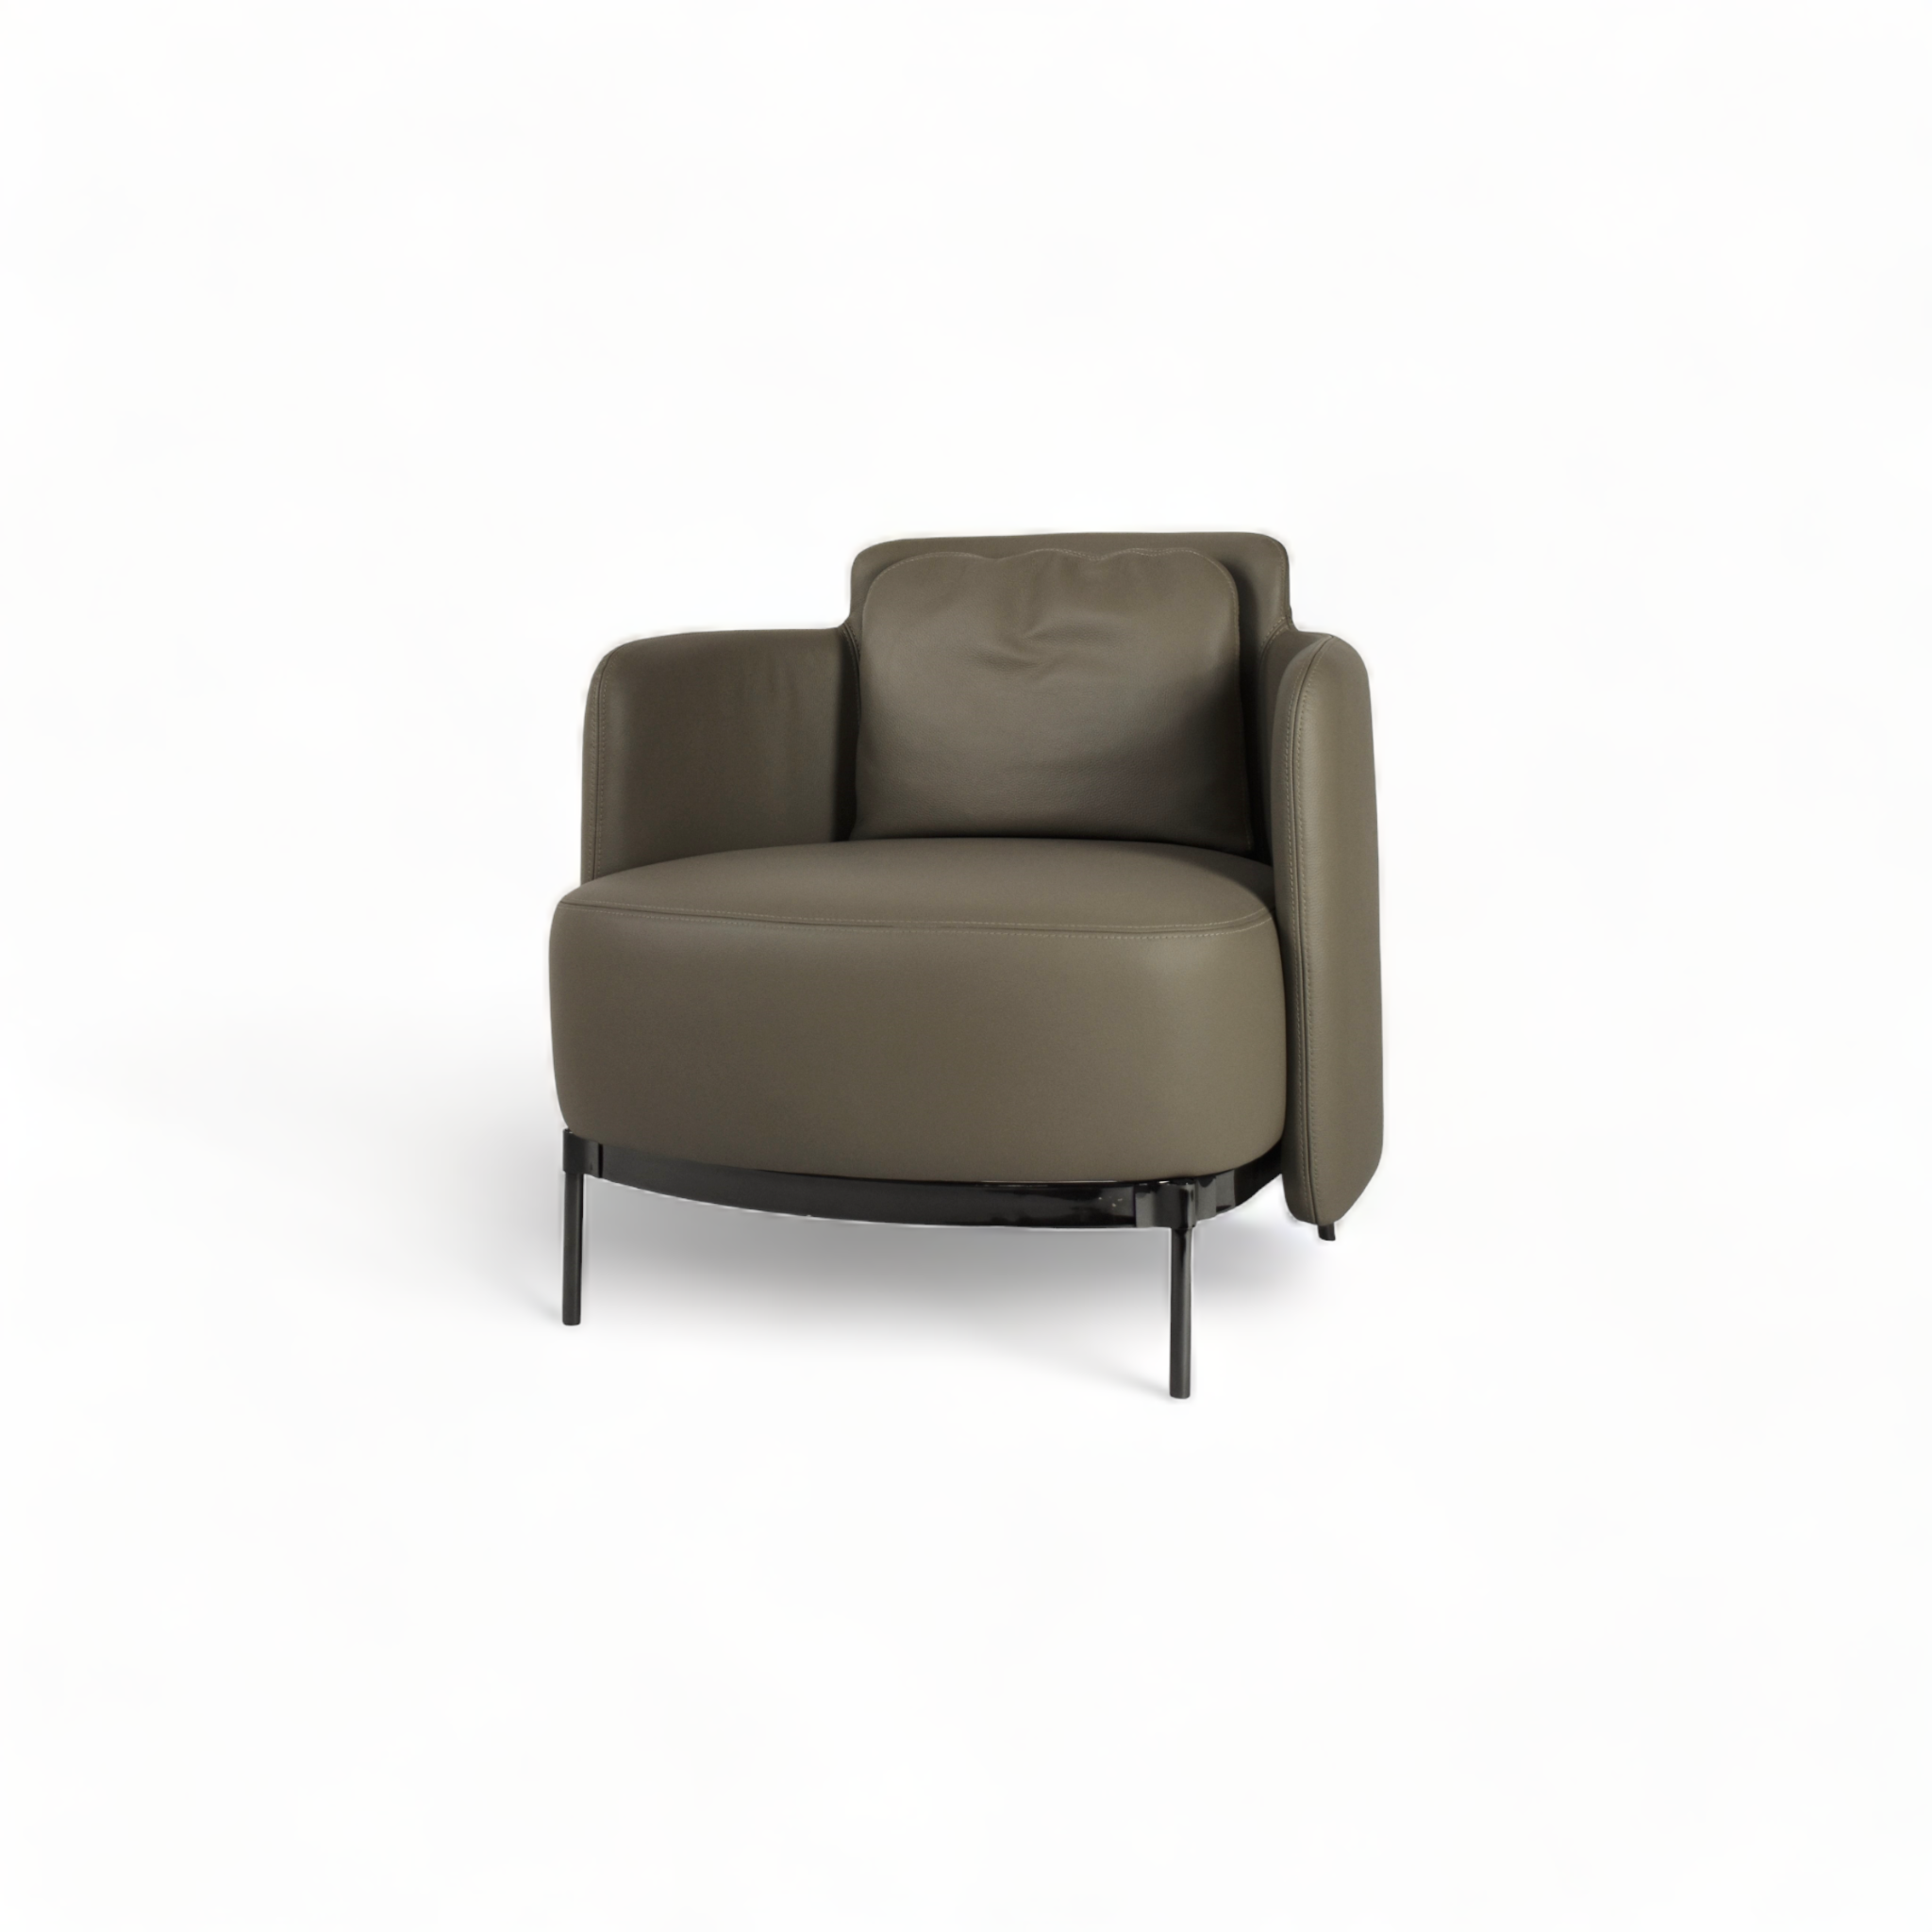 Darby Dark Taupe Lounge Chair